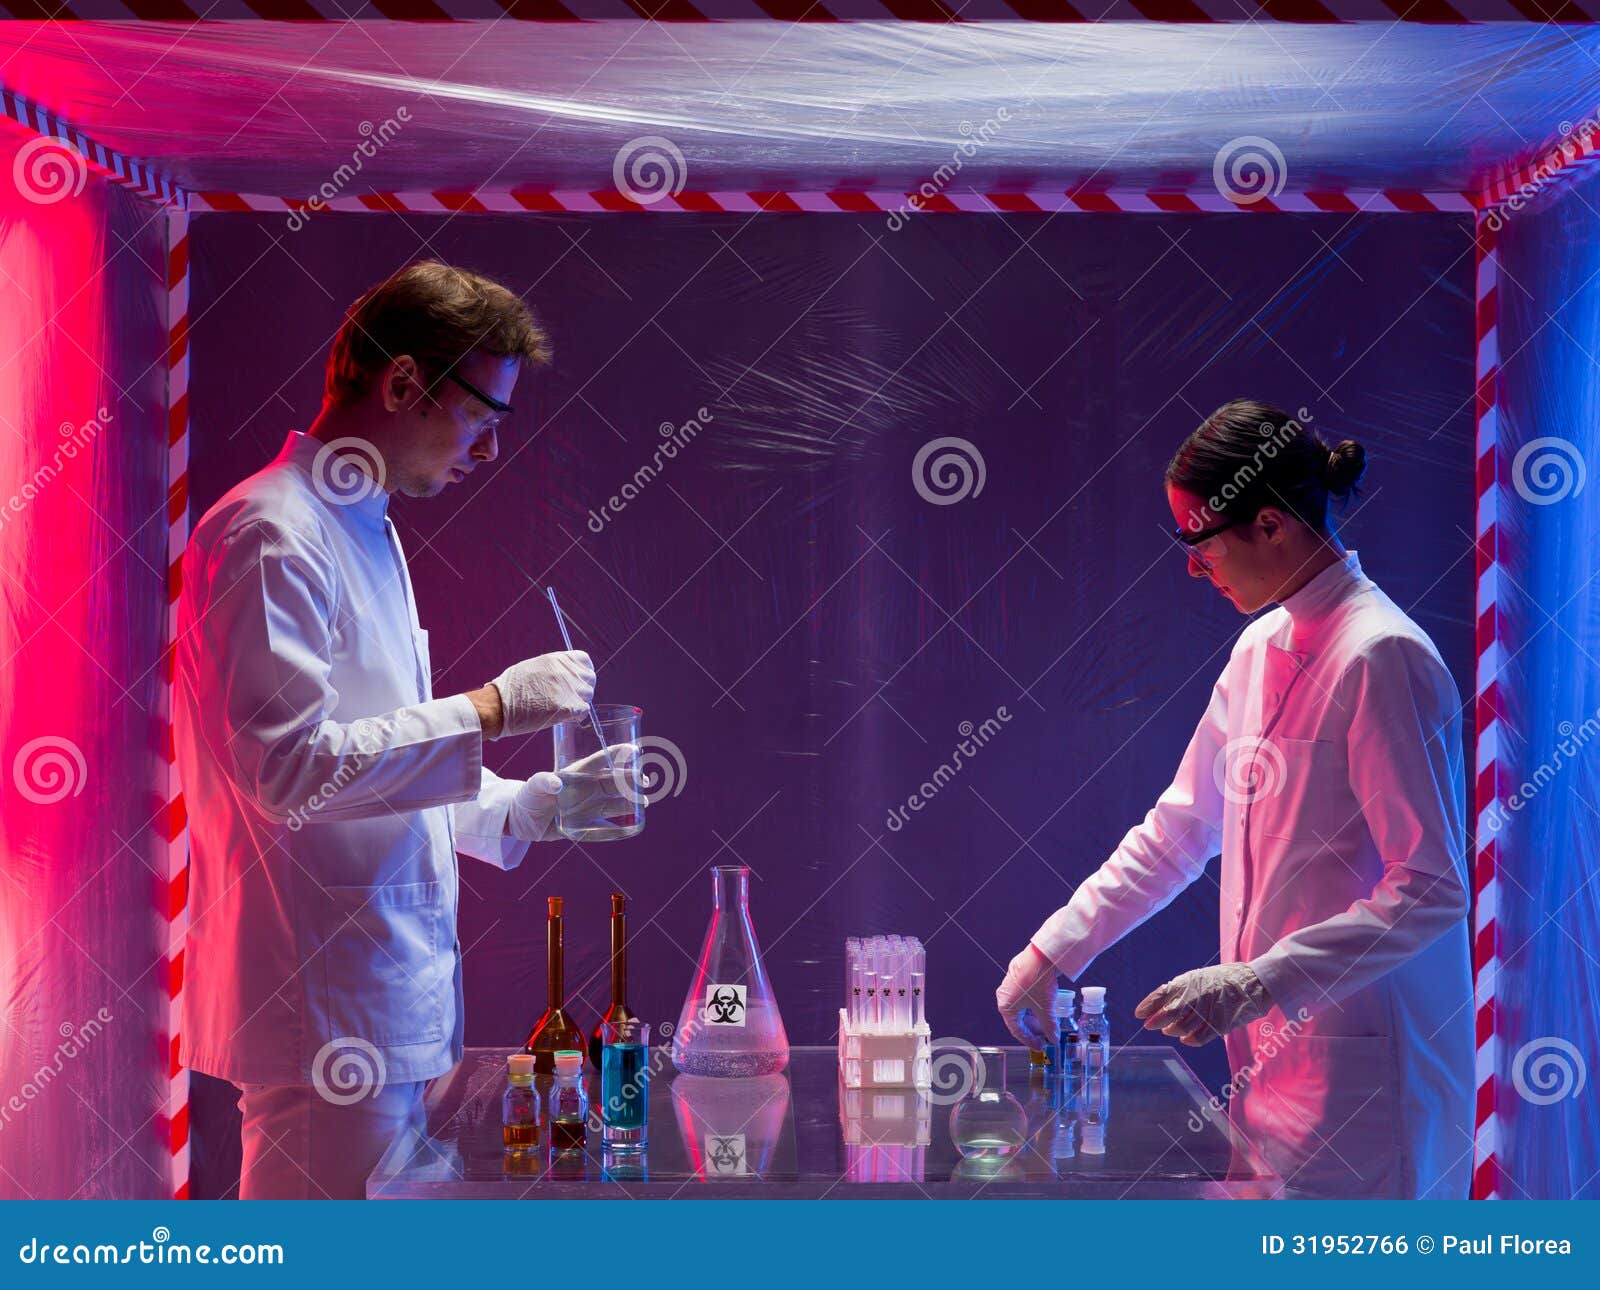 mixing chemicals in a containment tent